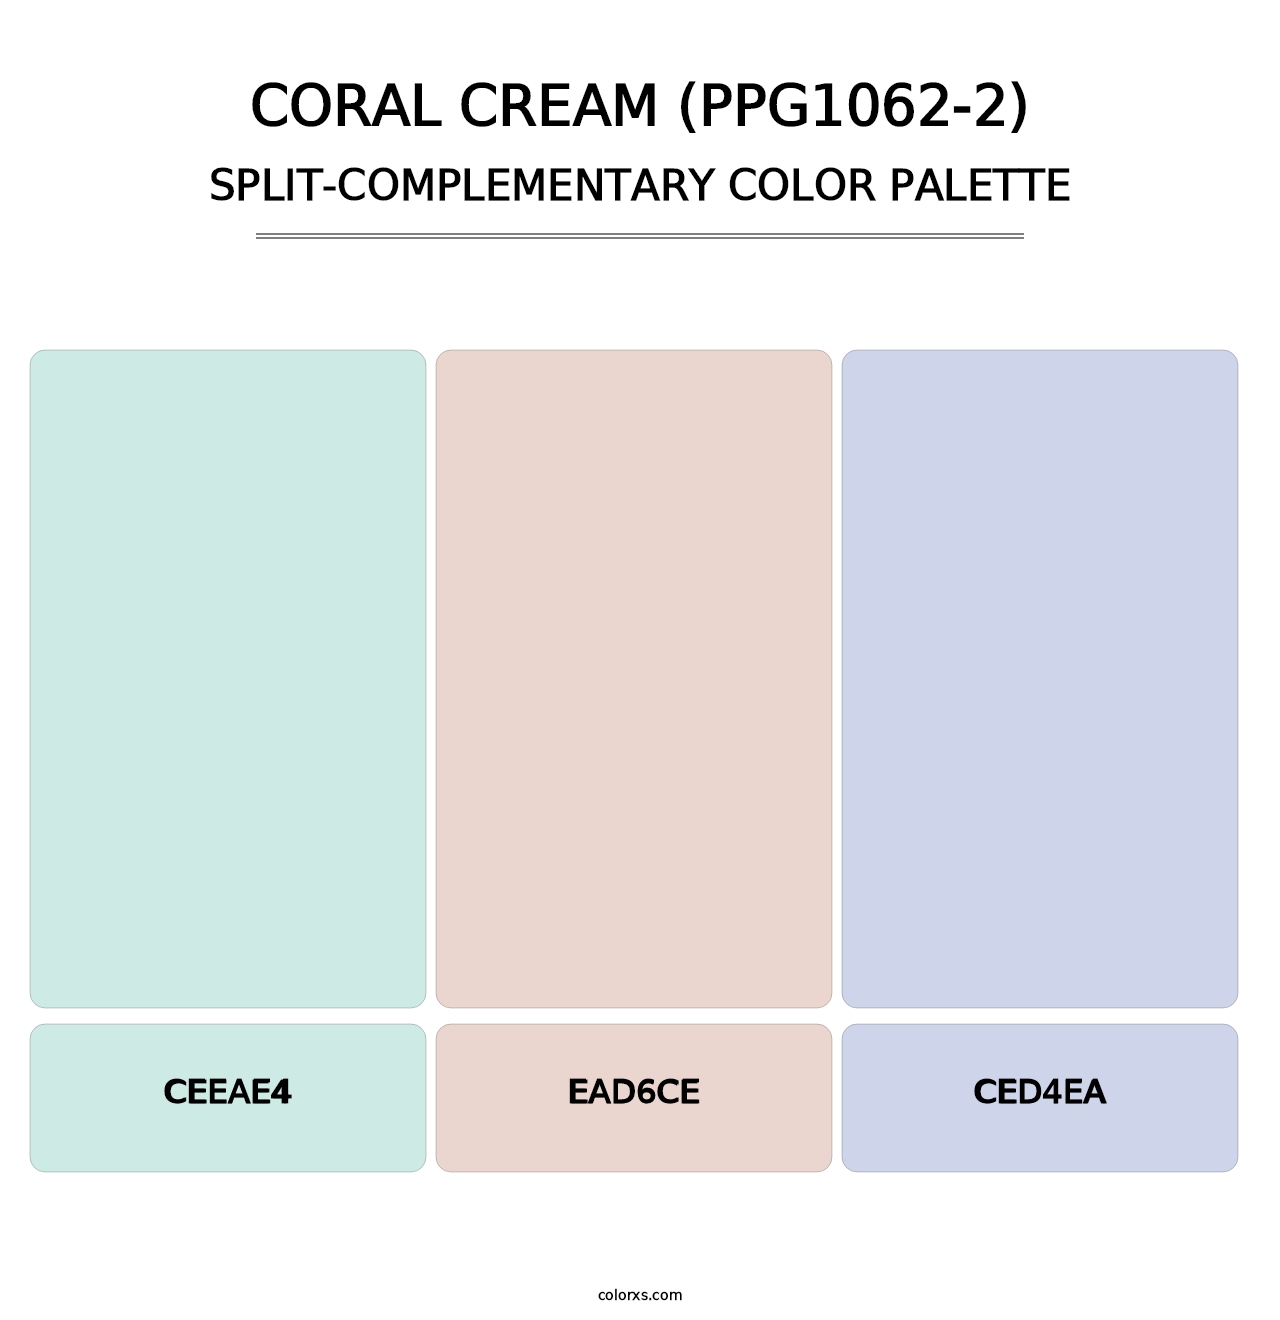 Coral Cream (PPG1062-2) - Split-Complementary Color Palette